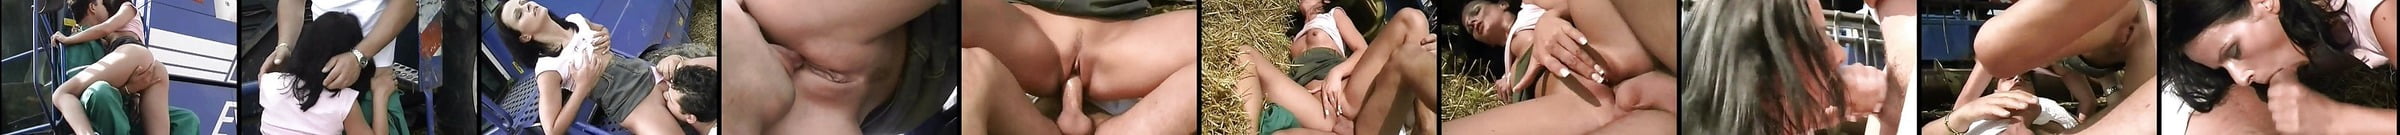 Hot Farm Girl Moans While Riding A Dick In The Fields Xhamster